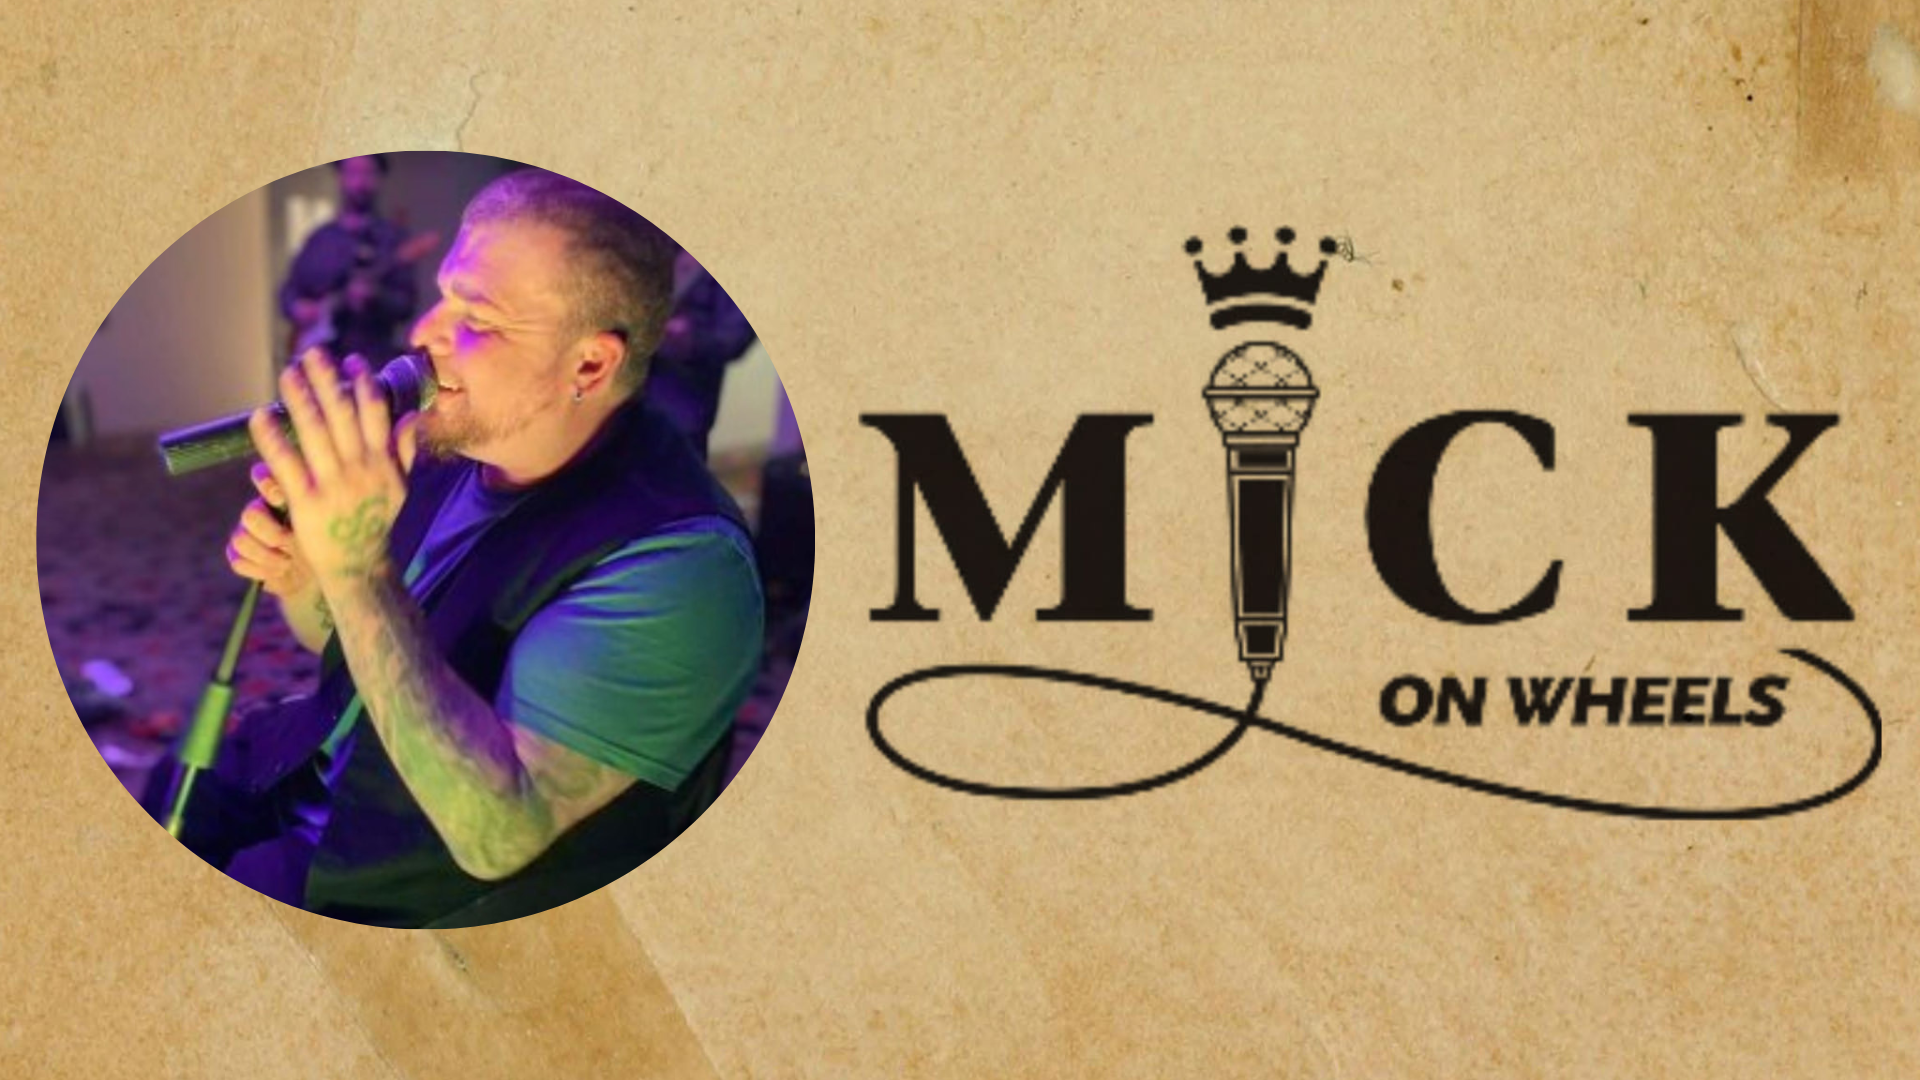 A Wollongong local and professional singer since 1995, Mick On Wheels delivers a powerful vocal style and broad range through various genres of music. These styles can range from Jazz, Blues, Rock, Funk, Soul to Reggae and much more.